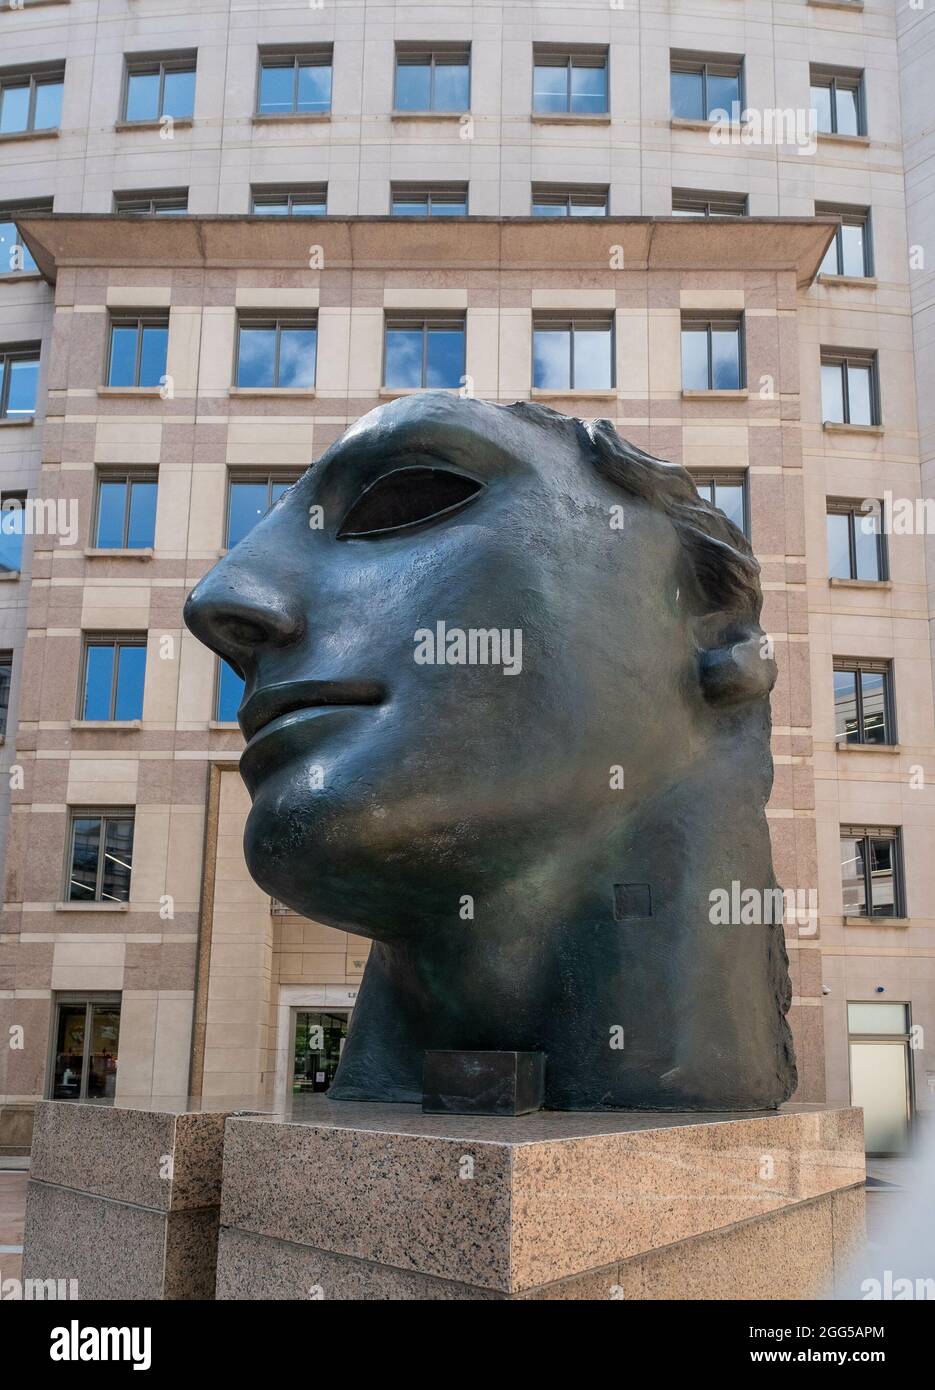 LONDON, UNITED KINGDOM - Aug 10, 2021: A vertical shot of a sculpture of Centurione I by Igor Mitoraj in Columbus Courtyard, Canary Wharf, London, UK Stock Photo